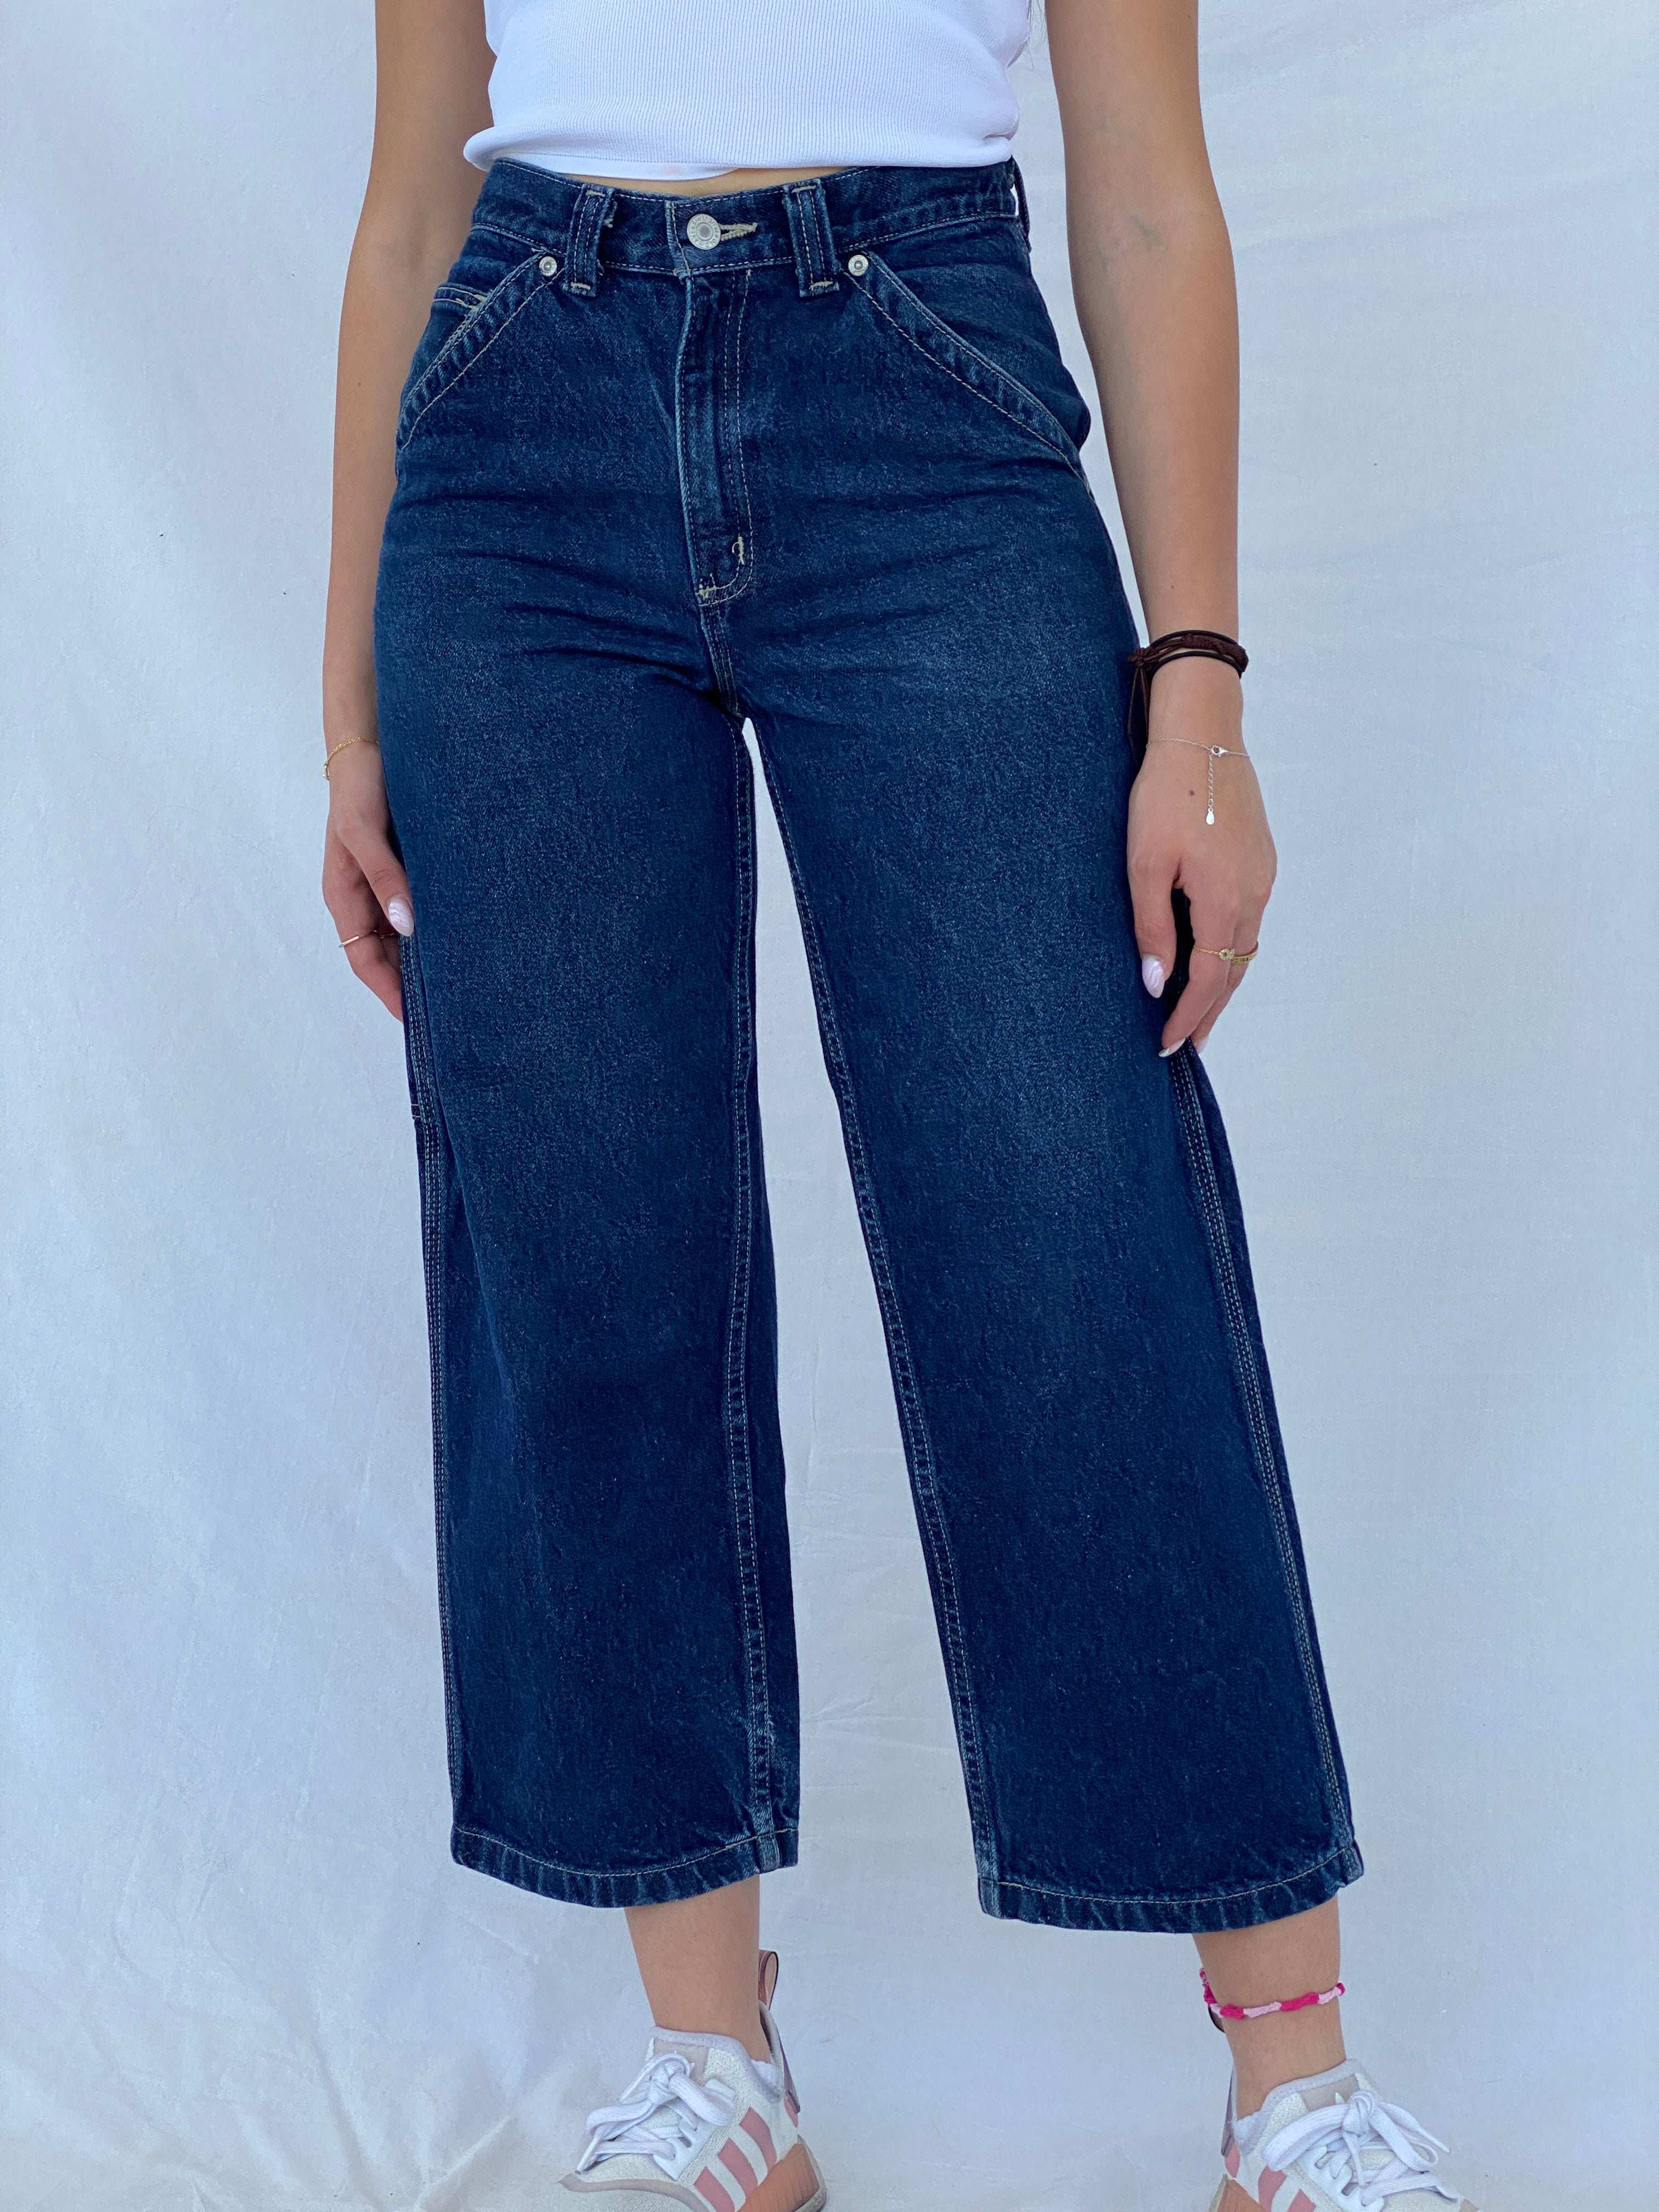 Vintage Y2K Old Navy Blue Jeans Hiphop Style Baggy Jeans - Balagan Vintage Jeans high waisted jeans, jeans, Juana, levis jeans, NEW IN